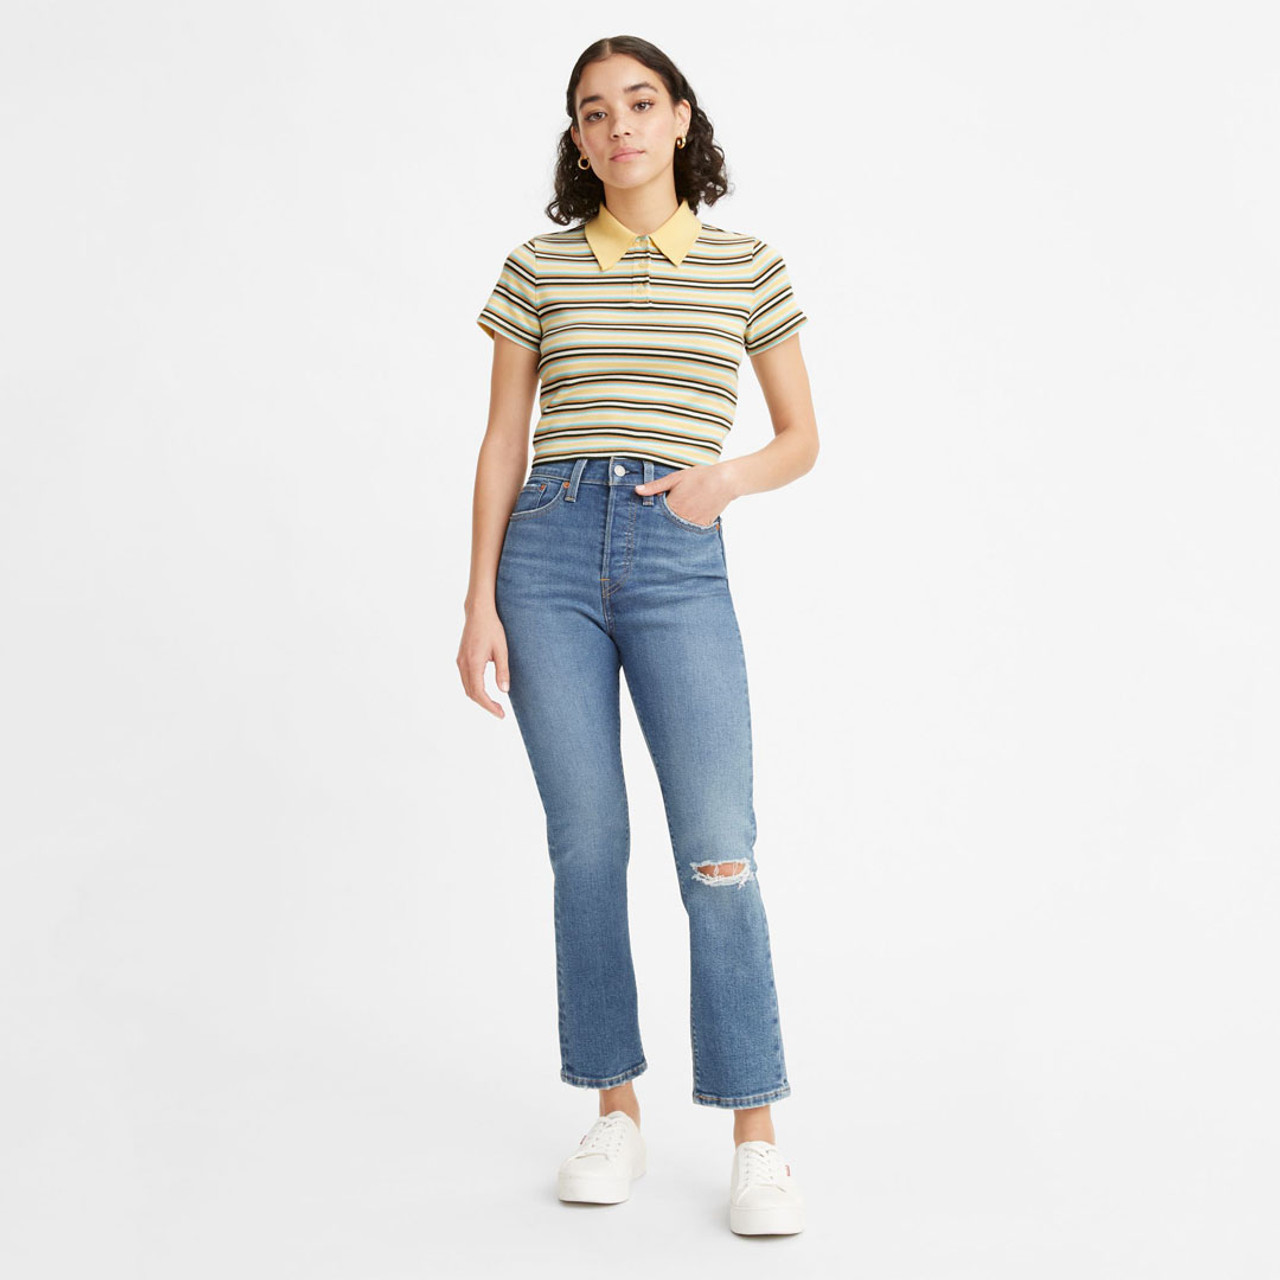 Levi's Women's Wedgie Straight Fit Jeans - Fall Star